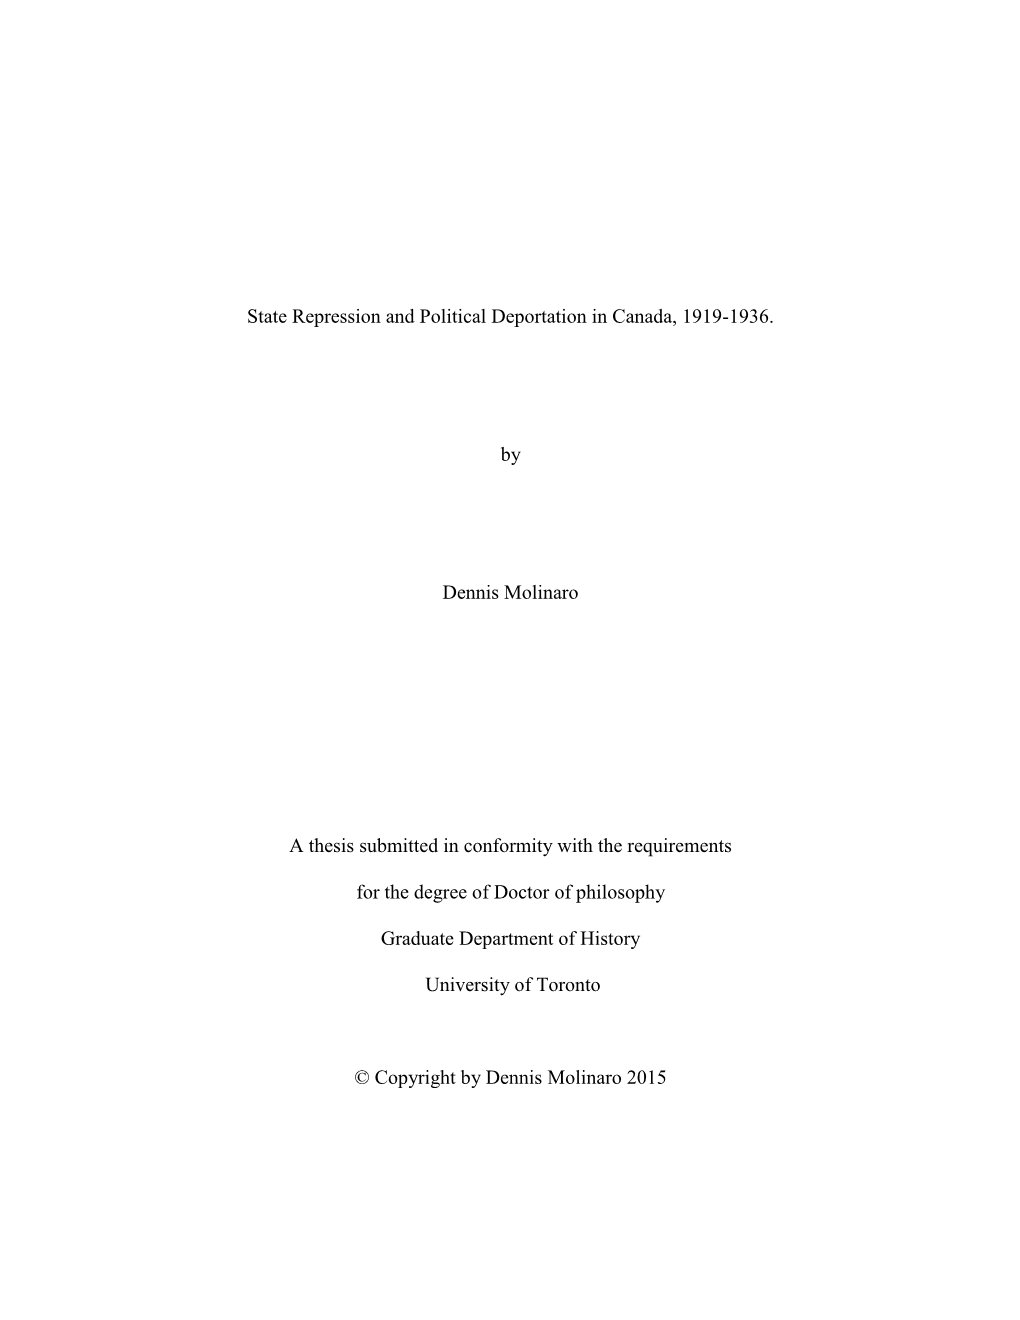 State Repression and Political Deportation in Canada, 1919-1936. by Dennis Molinaro a Thesis Submitted in Conformity with the Re